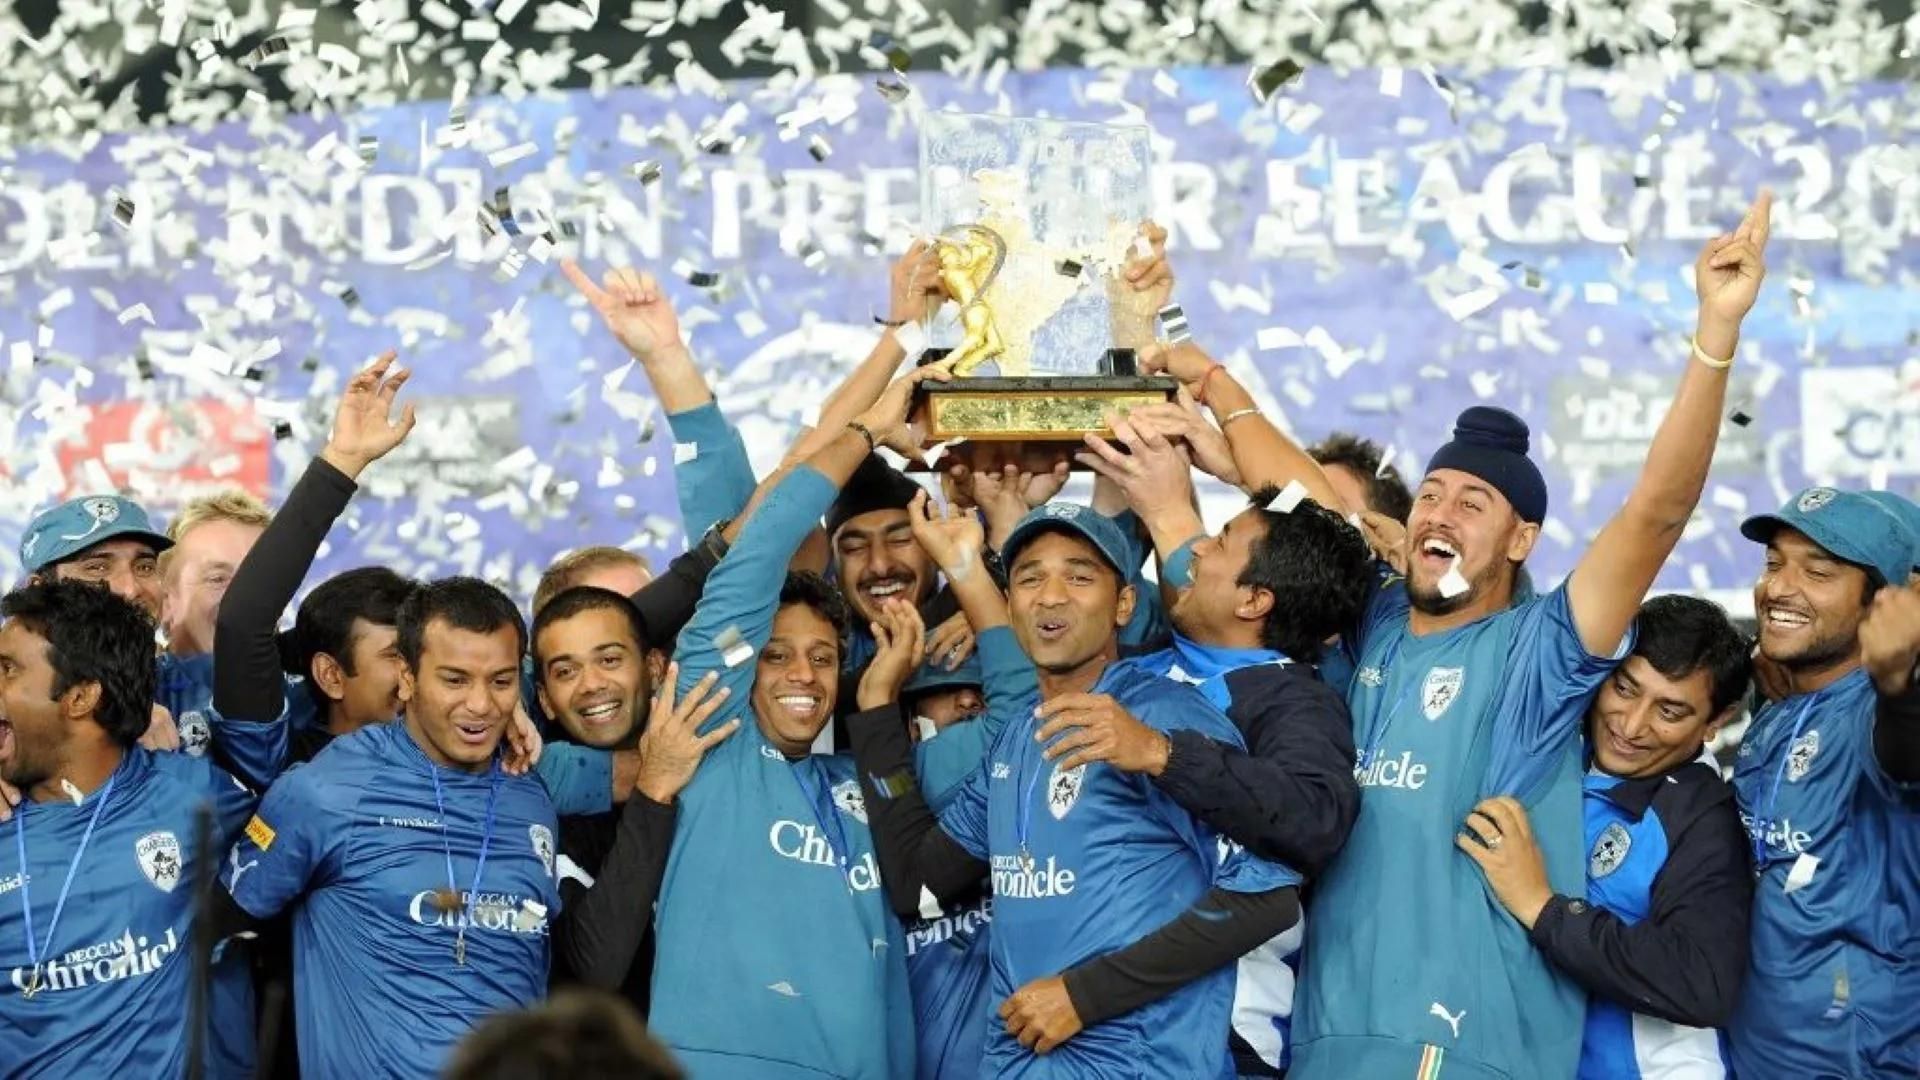 Deccan Chargers lifted the IPL 2009 title (Image: BCCI/IPL)